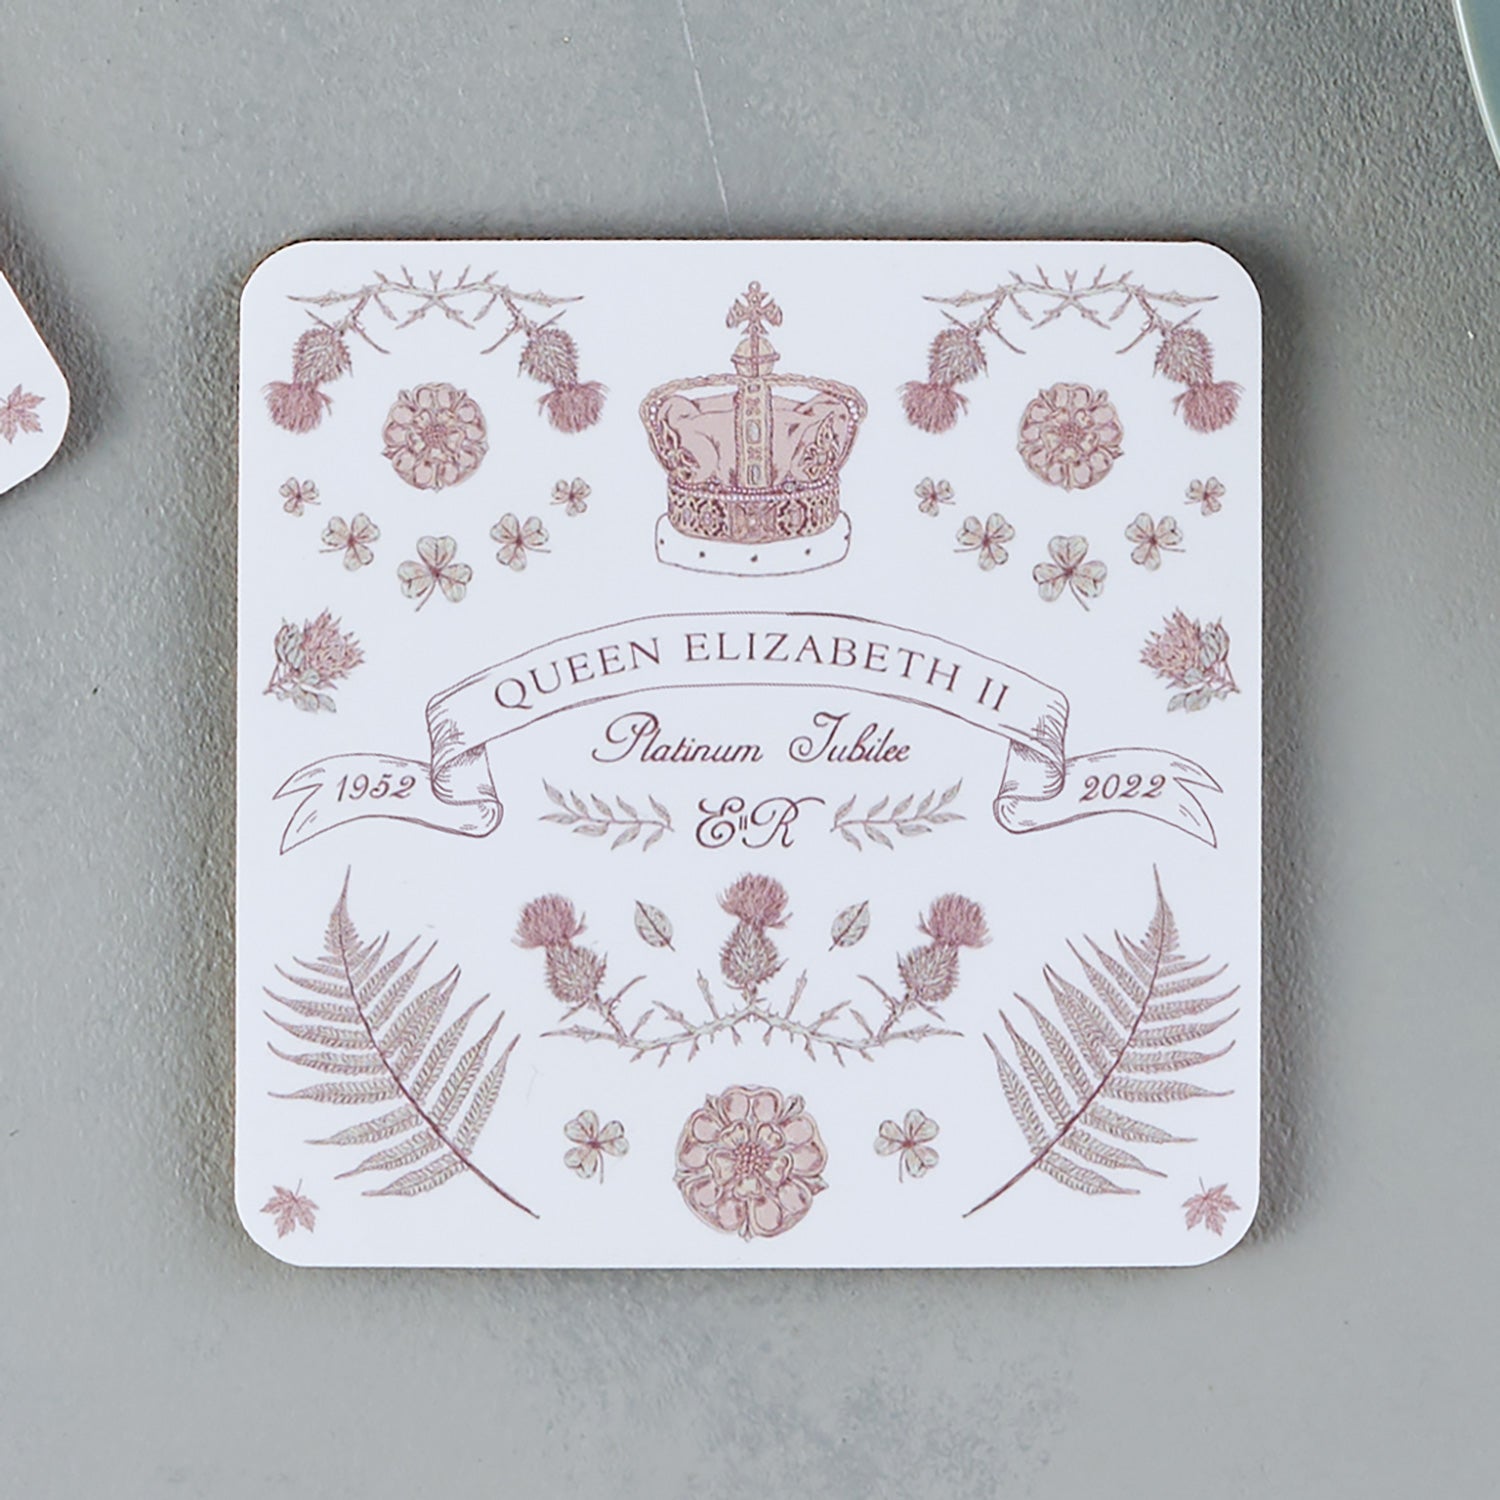 Queen's Platinum Jubilee Set Of 4 Coasters by Victoria Eggs 2